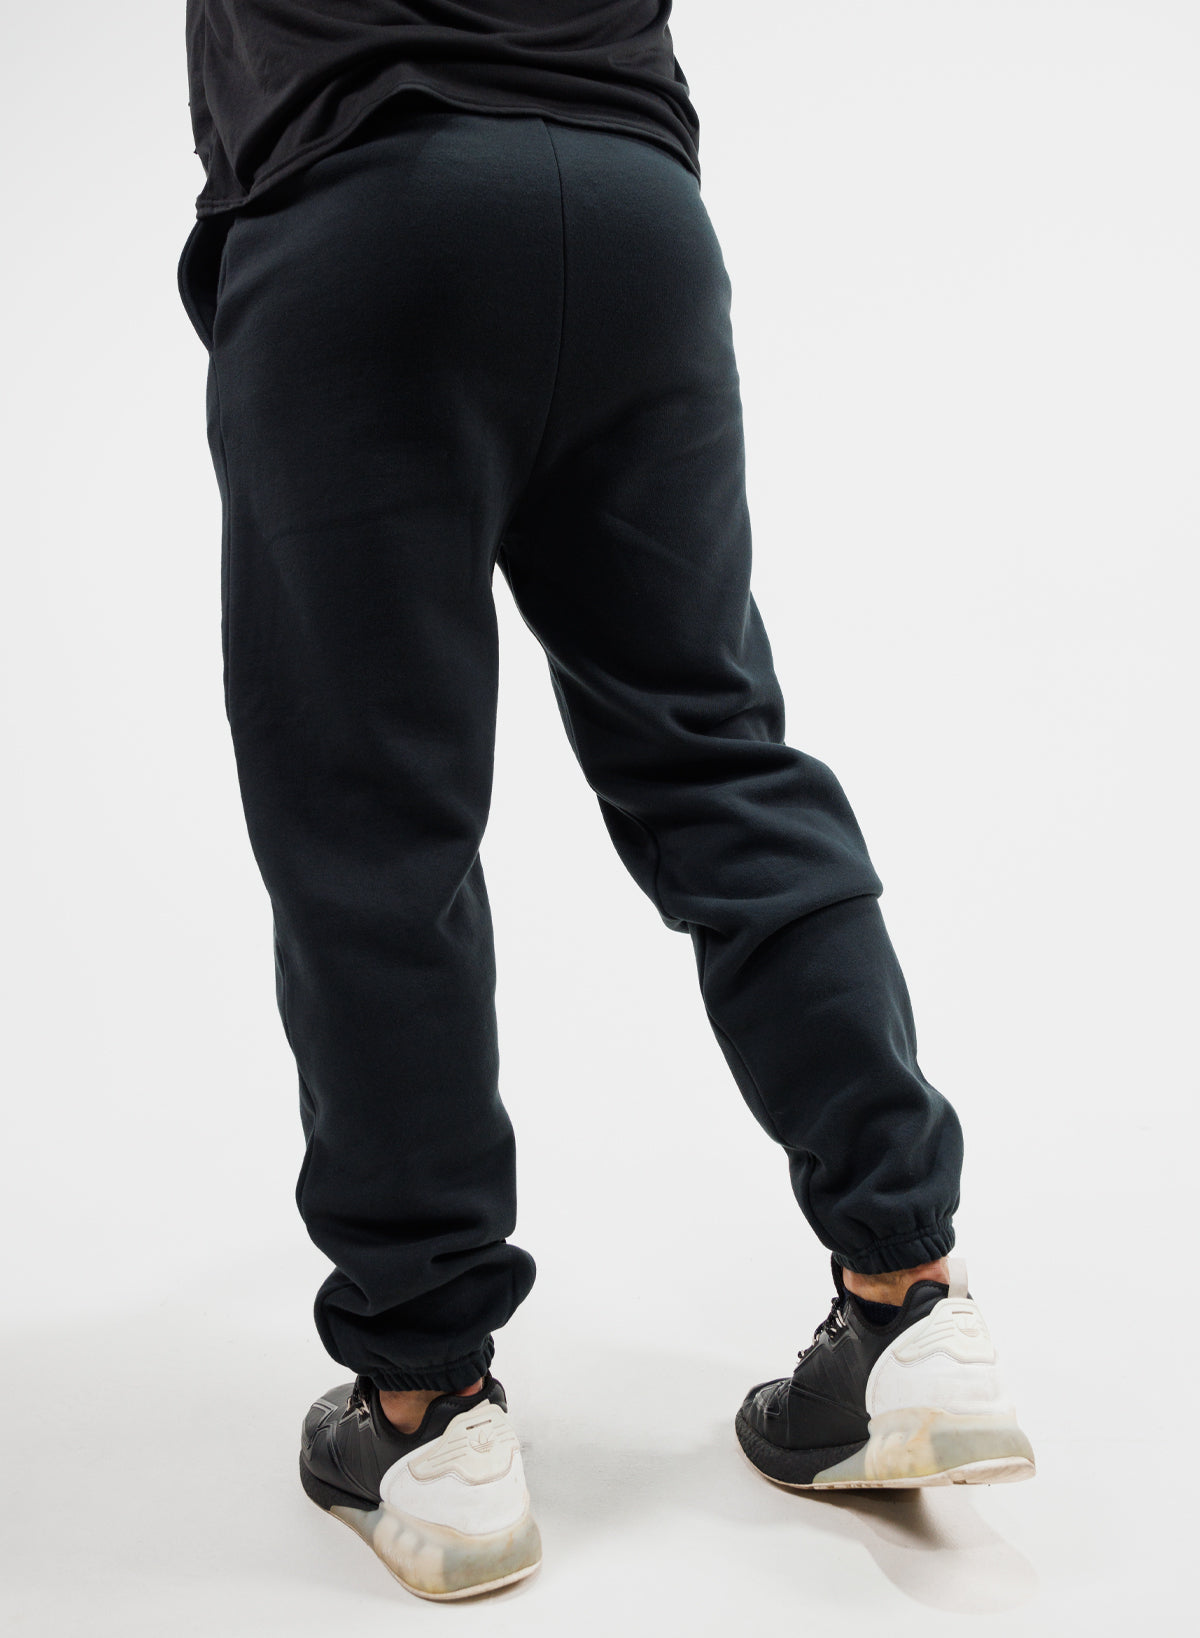 MORE THAN EVER CHAMP JOGGERS - BLACK